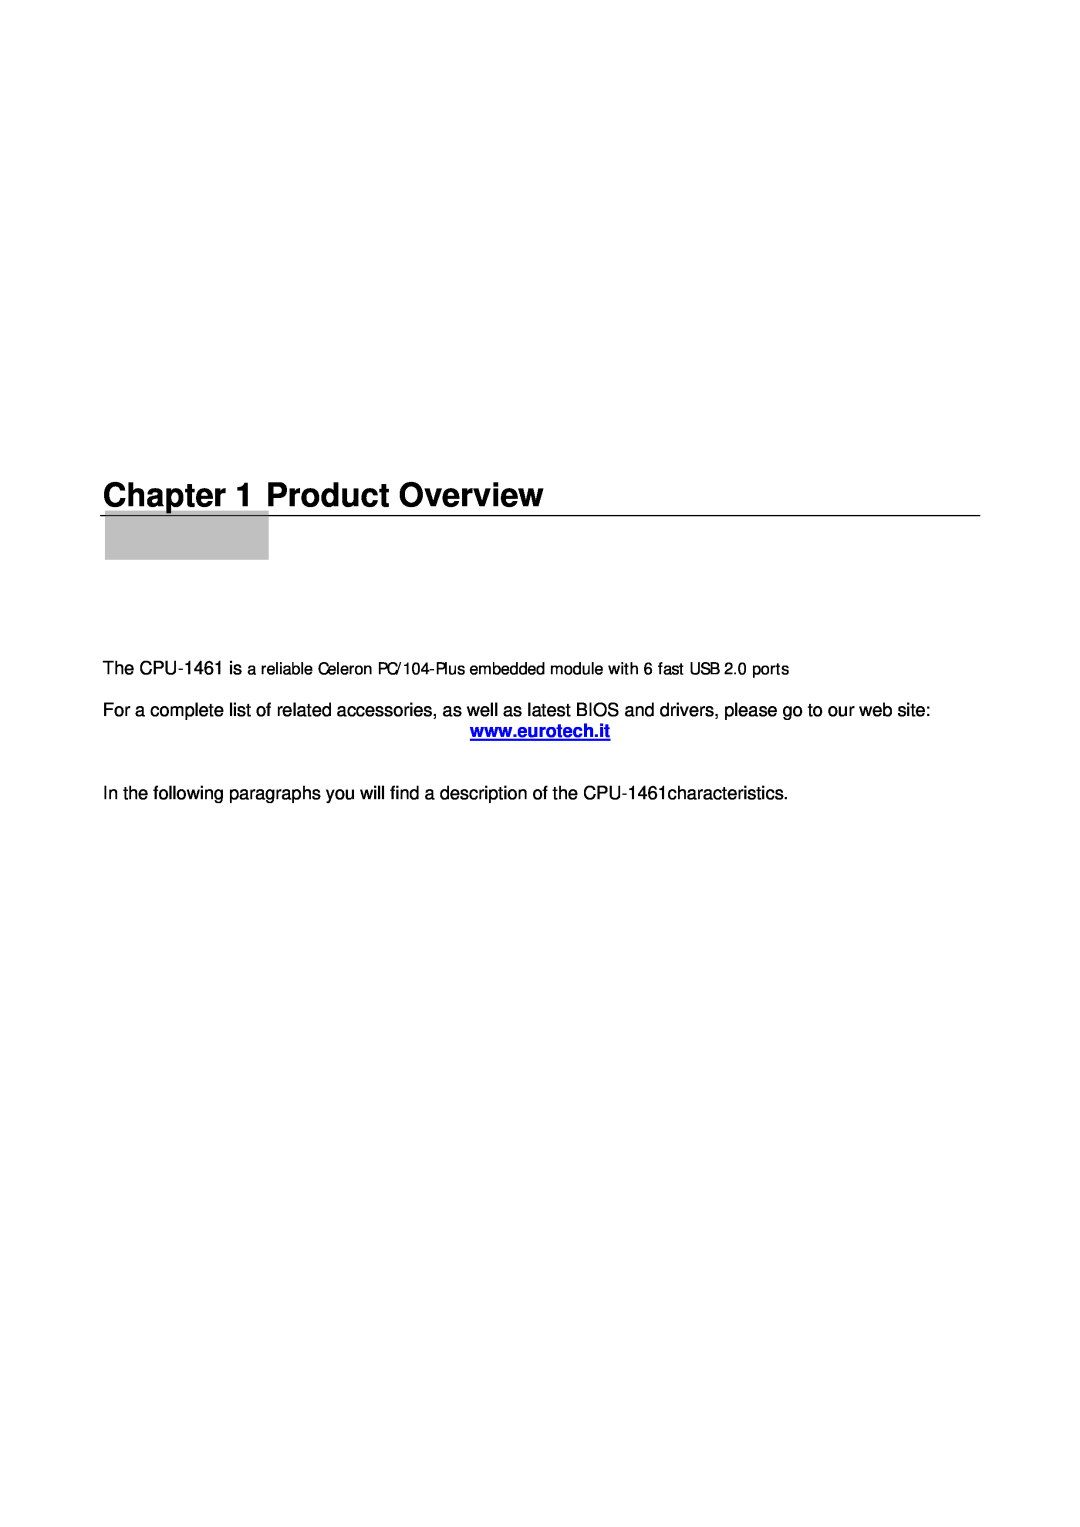 Eurotech Appliances CPU-1461 user manual Product Overview 